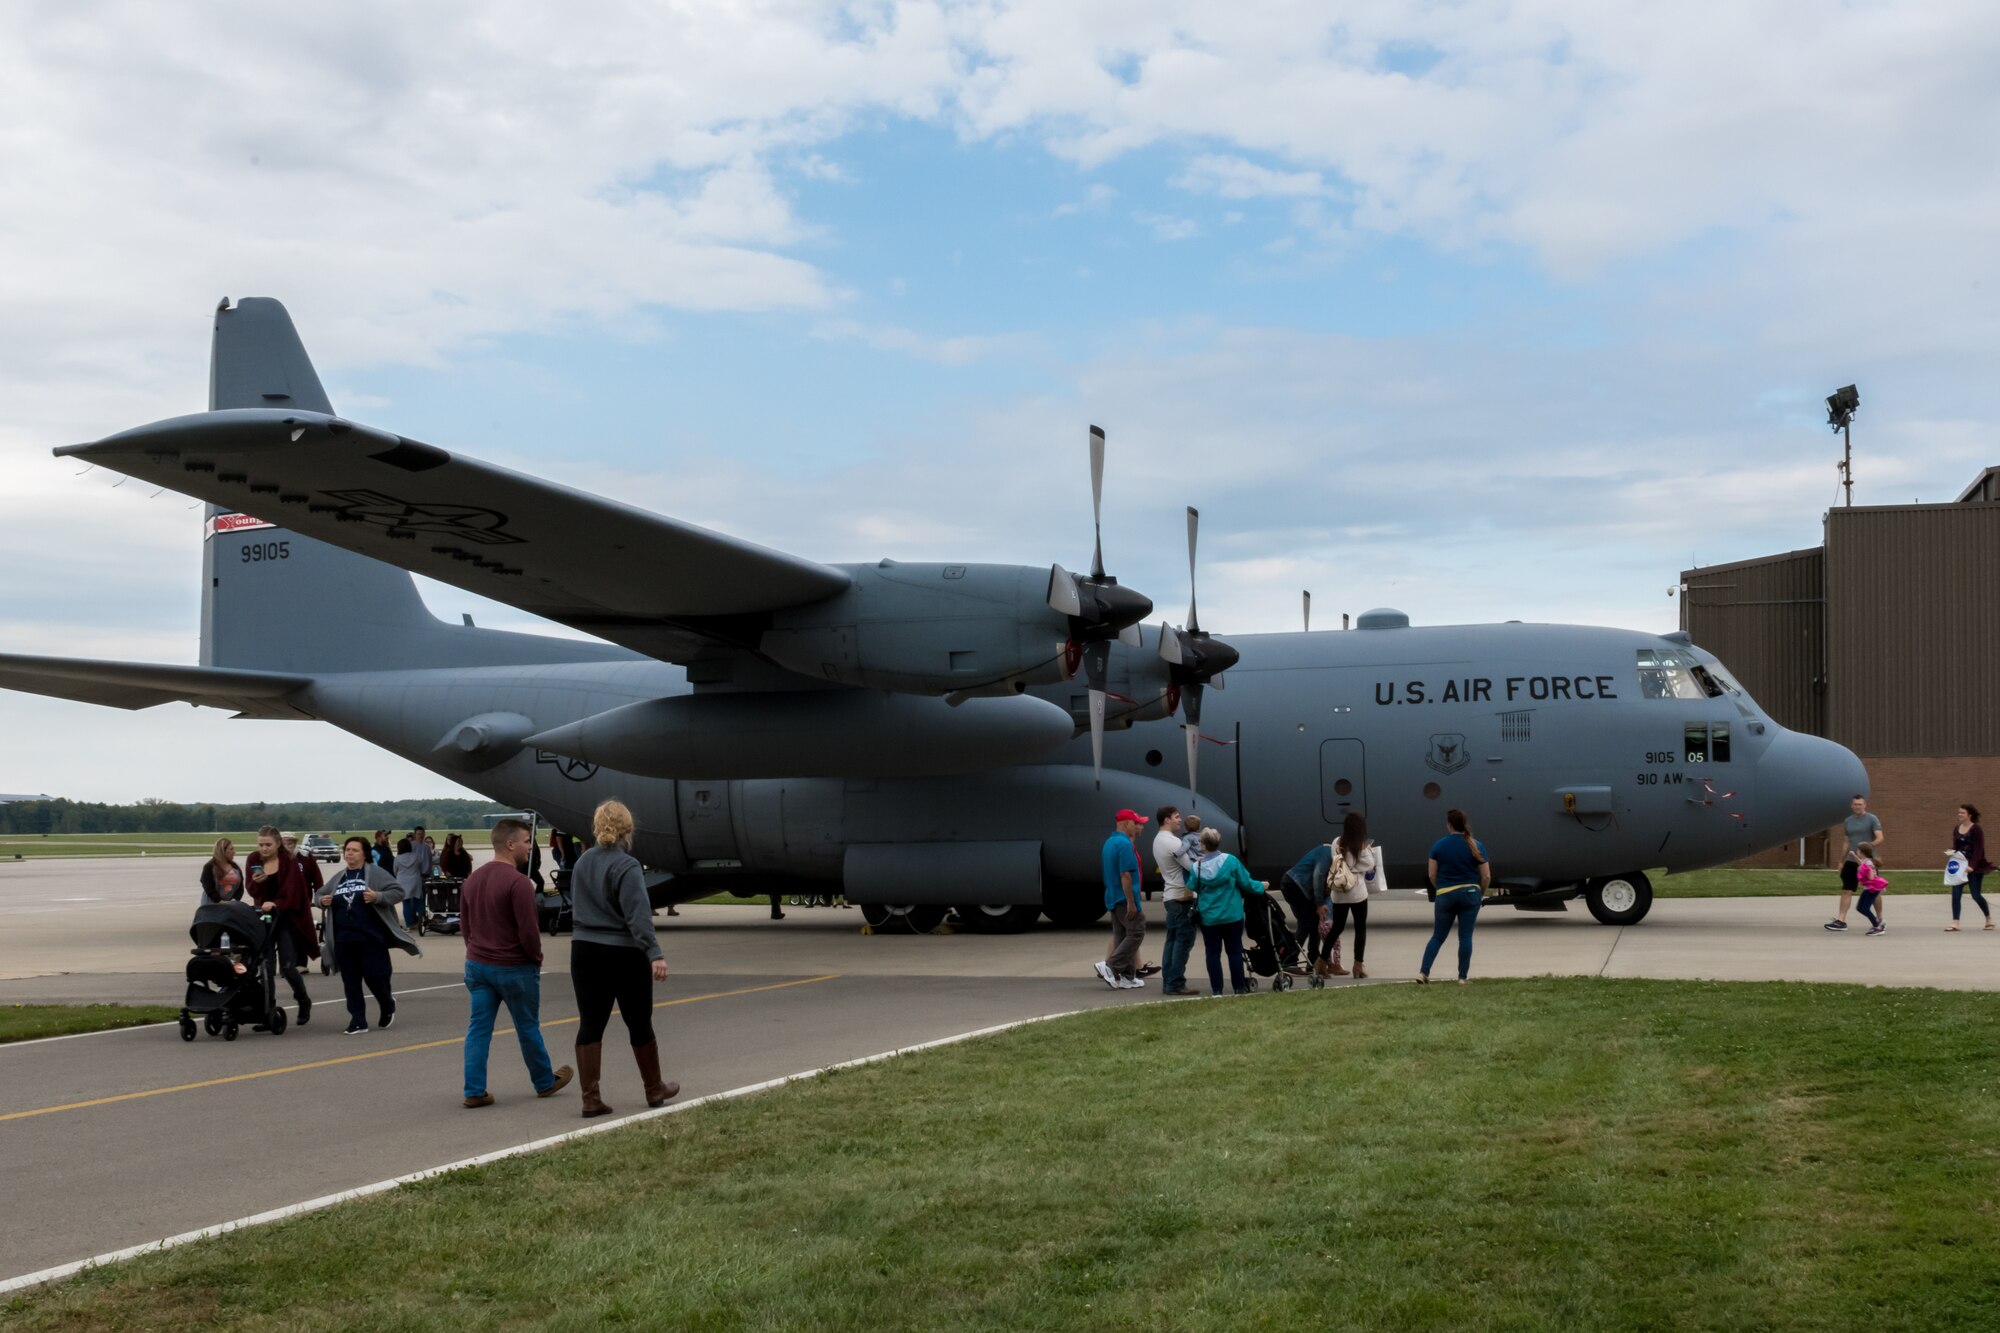 The 910th Airlift Wing hosted their annual family day weekend, Oct. 5 and 6, 2019, at Youngstown Air Reserve Station. The two-day event focused on bringing Reserve Citizen Airmen's families to the installation to acknowledge and show appreciation for their support.